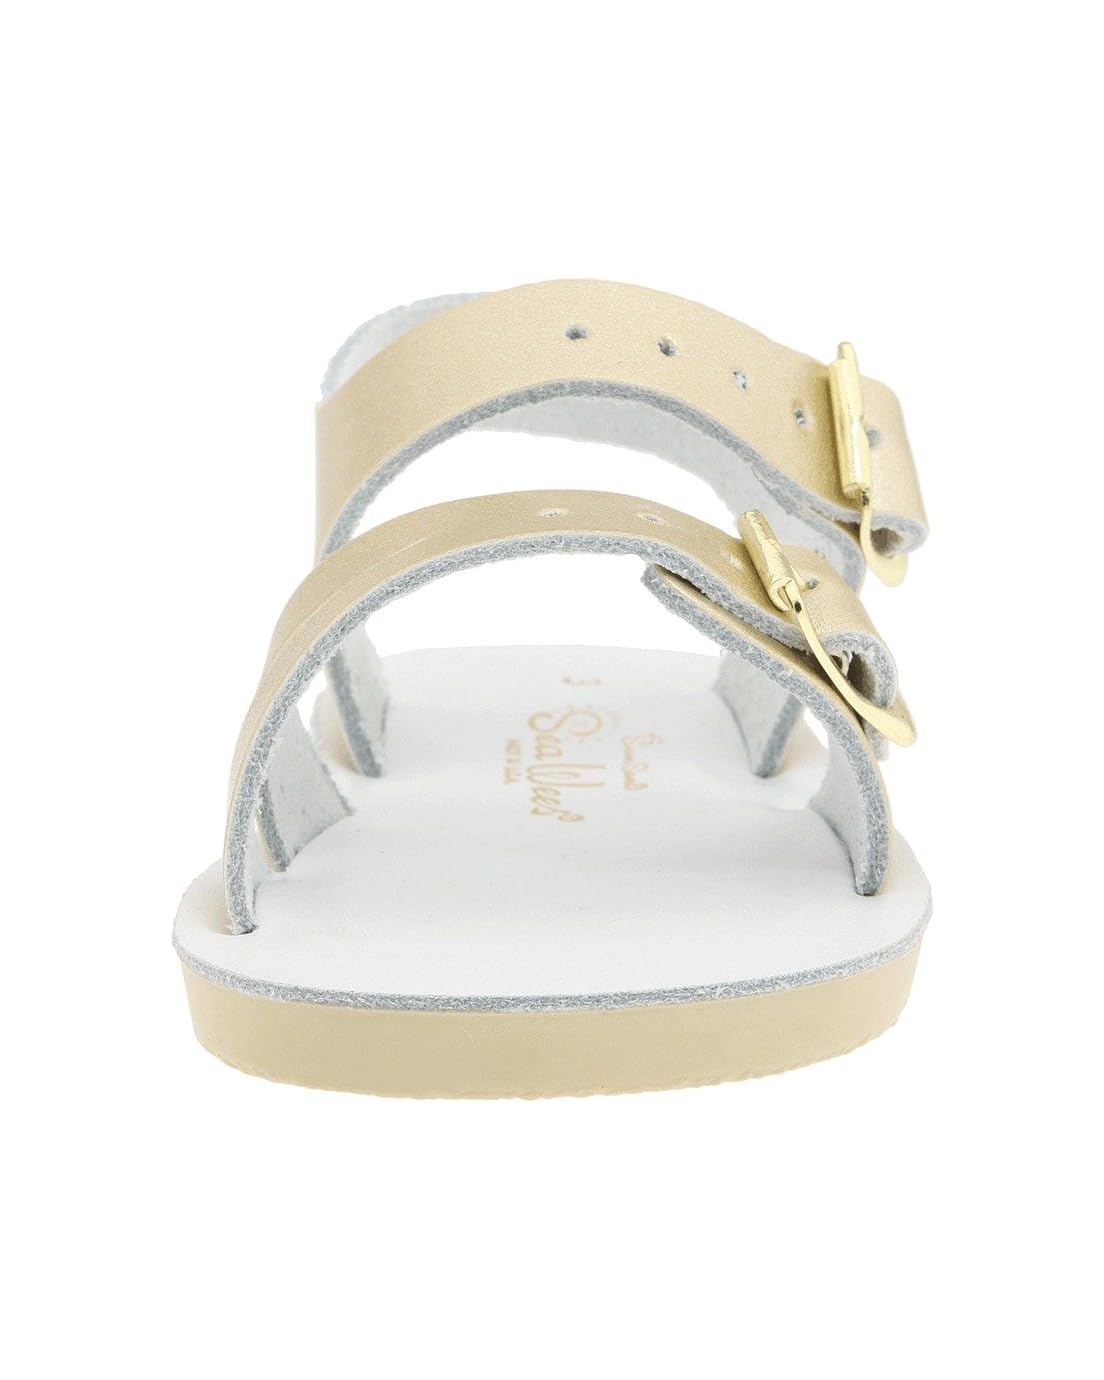  Salt Water Sandal by Hoy Shoes Sun-San - Sea Wees (Infant/Toddler)